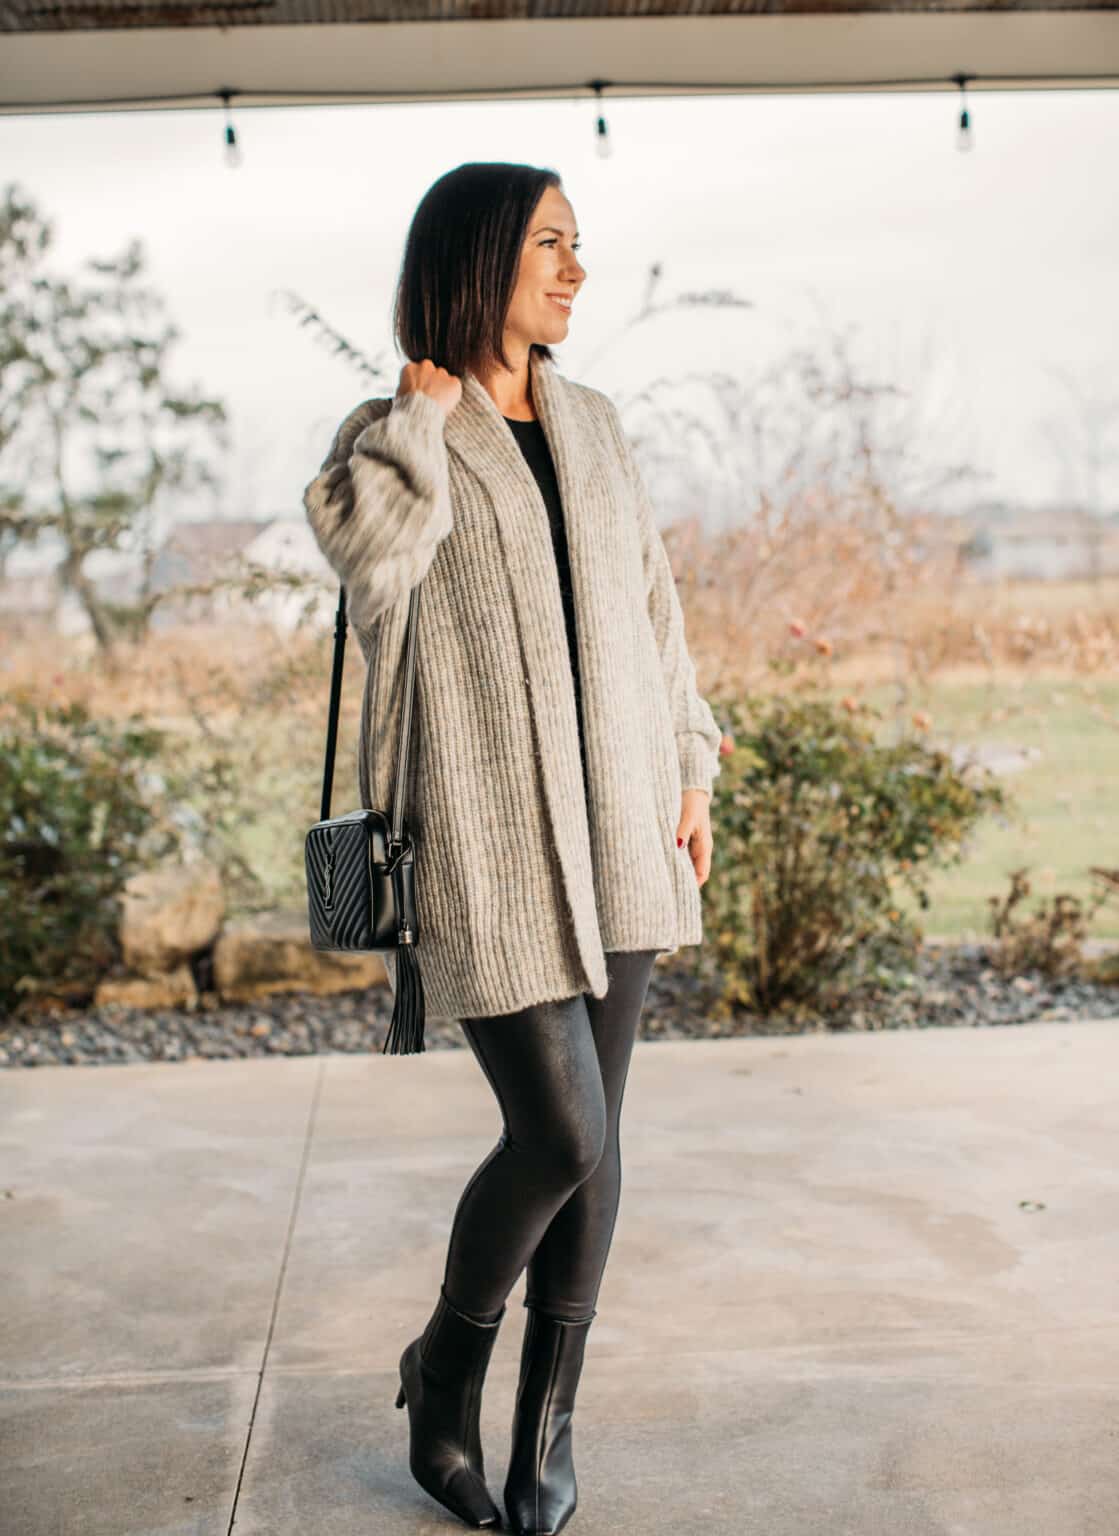 Lindsey wearing a long grey cardigan with faux leather leggings and black ankle boots